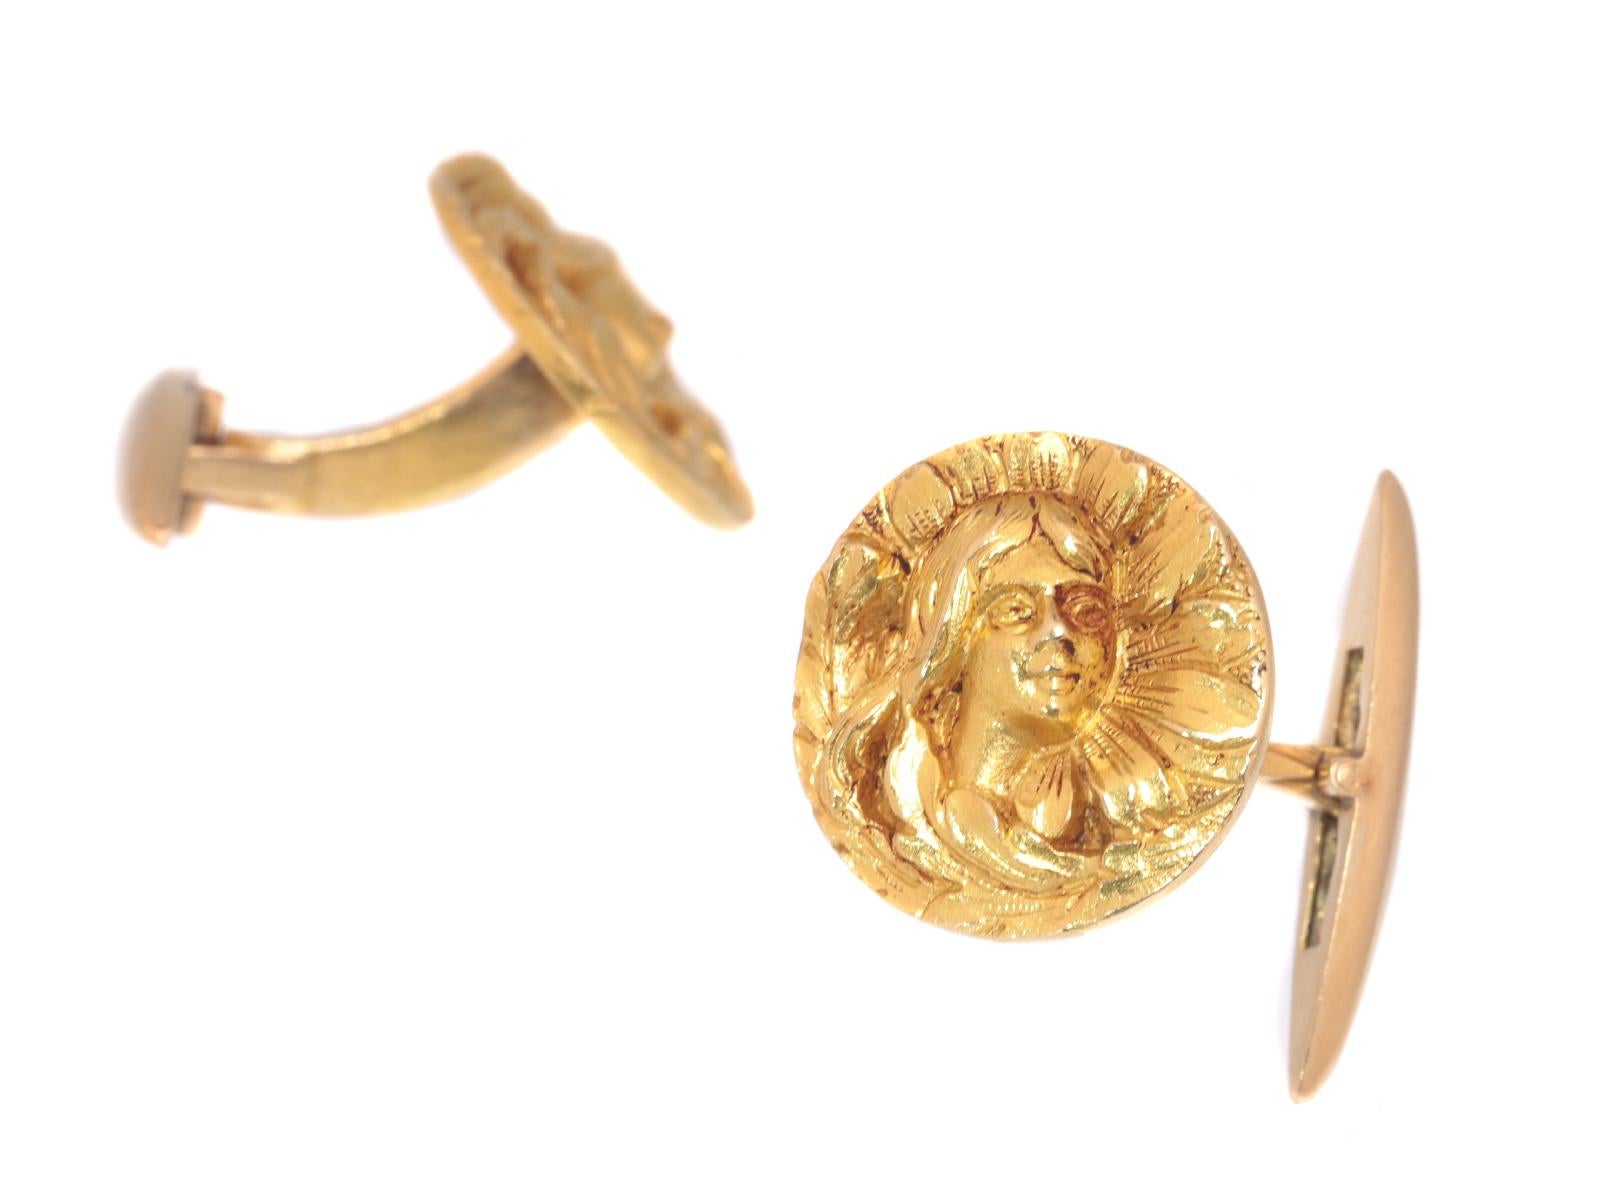 Antique jewelry object group: cufflinks

Condition: very good condition

Do you wish for a 360° view of this unique jewel?
Just send us your request and we’ll give you the direct link to the videoclip showing this treasure’s full splendour as no